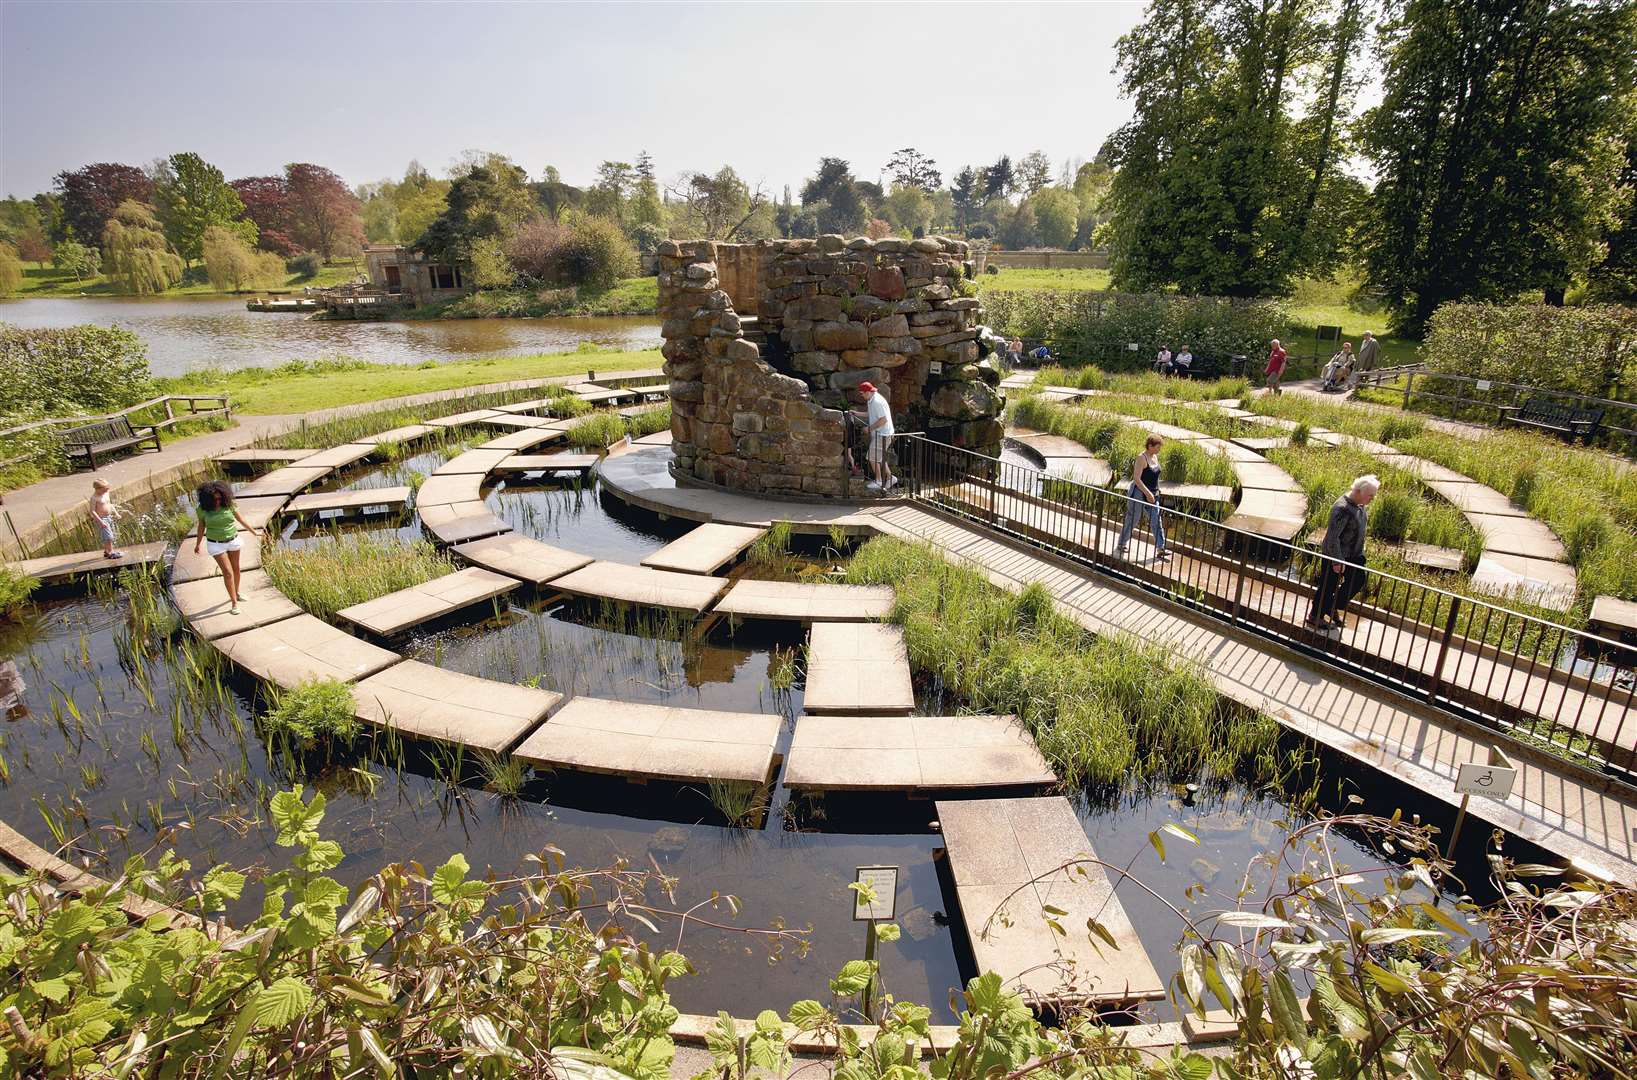 The Splashing Water Maze at Hever Castle